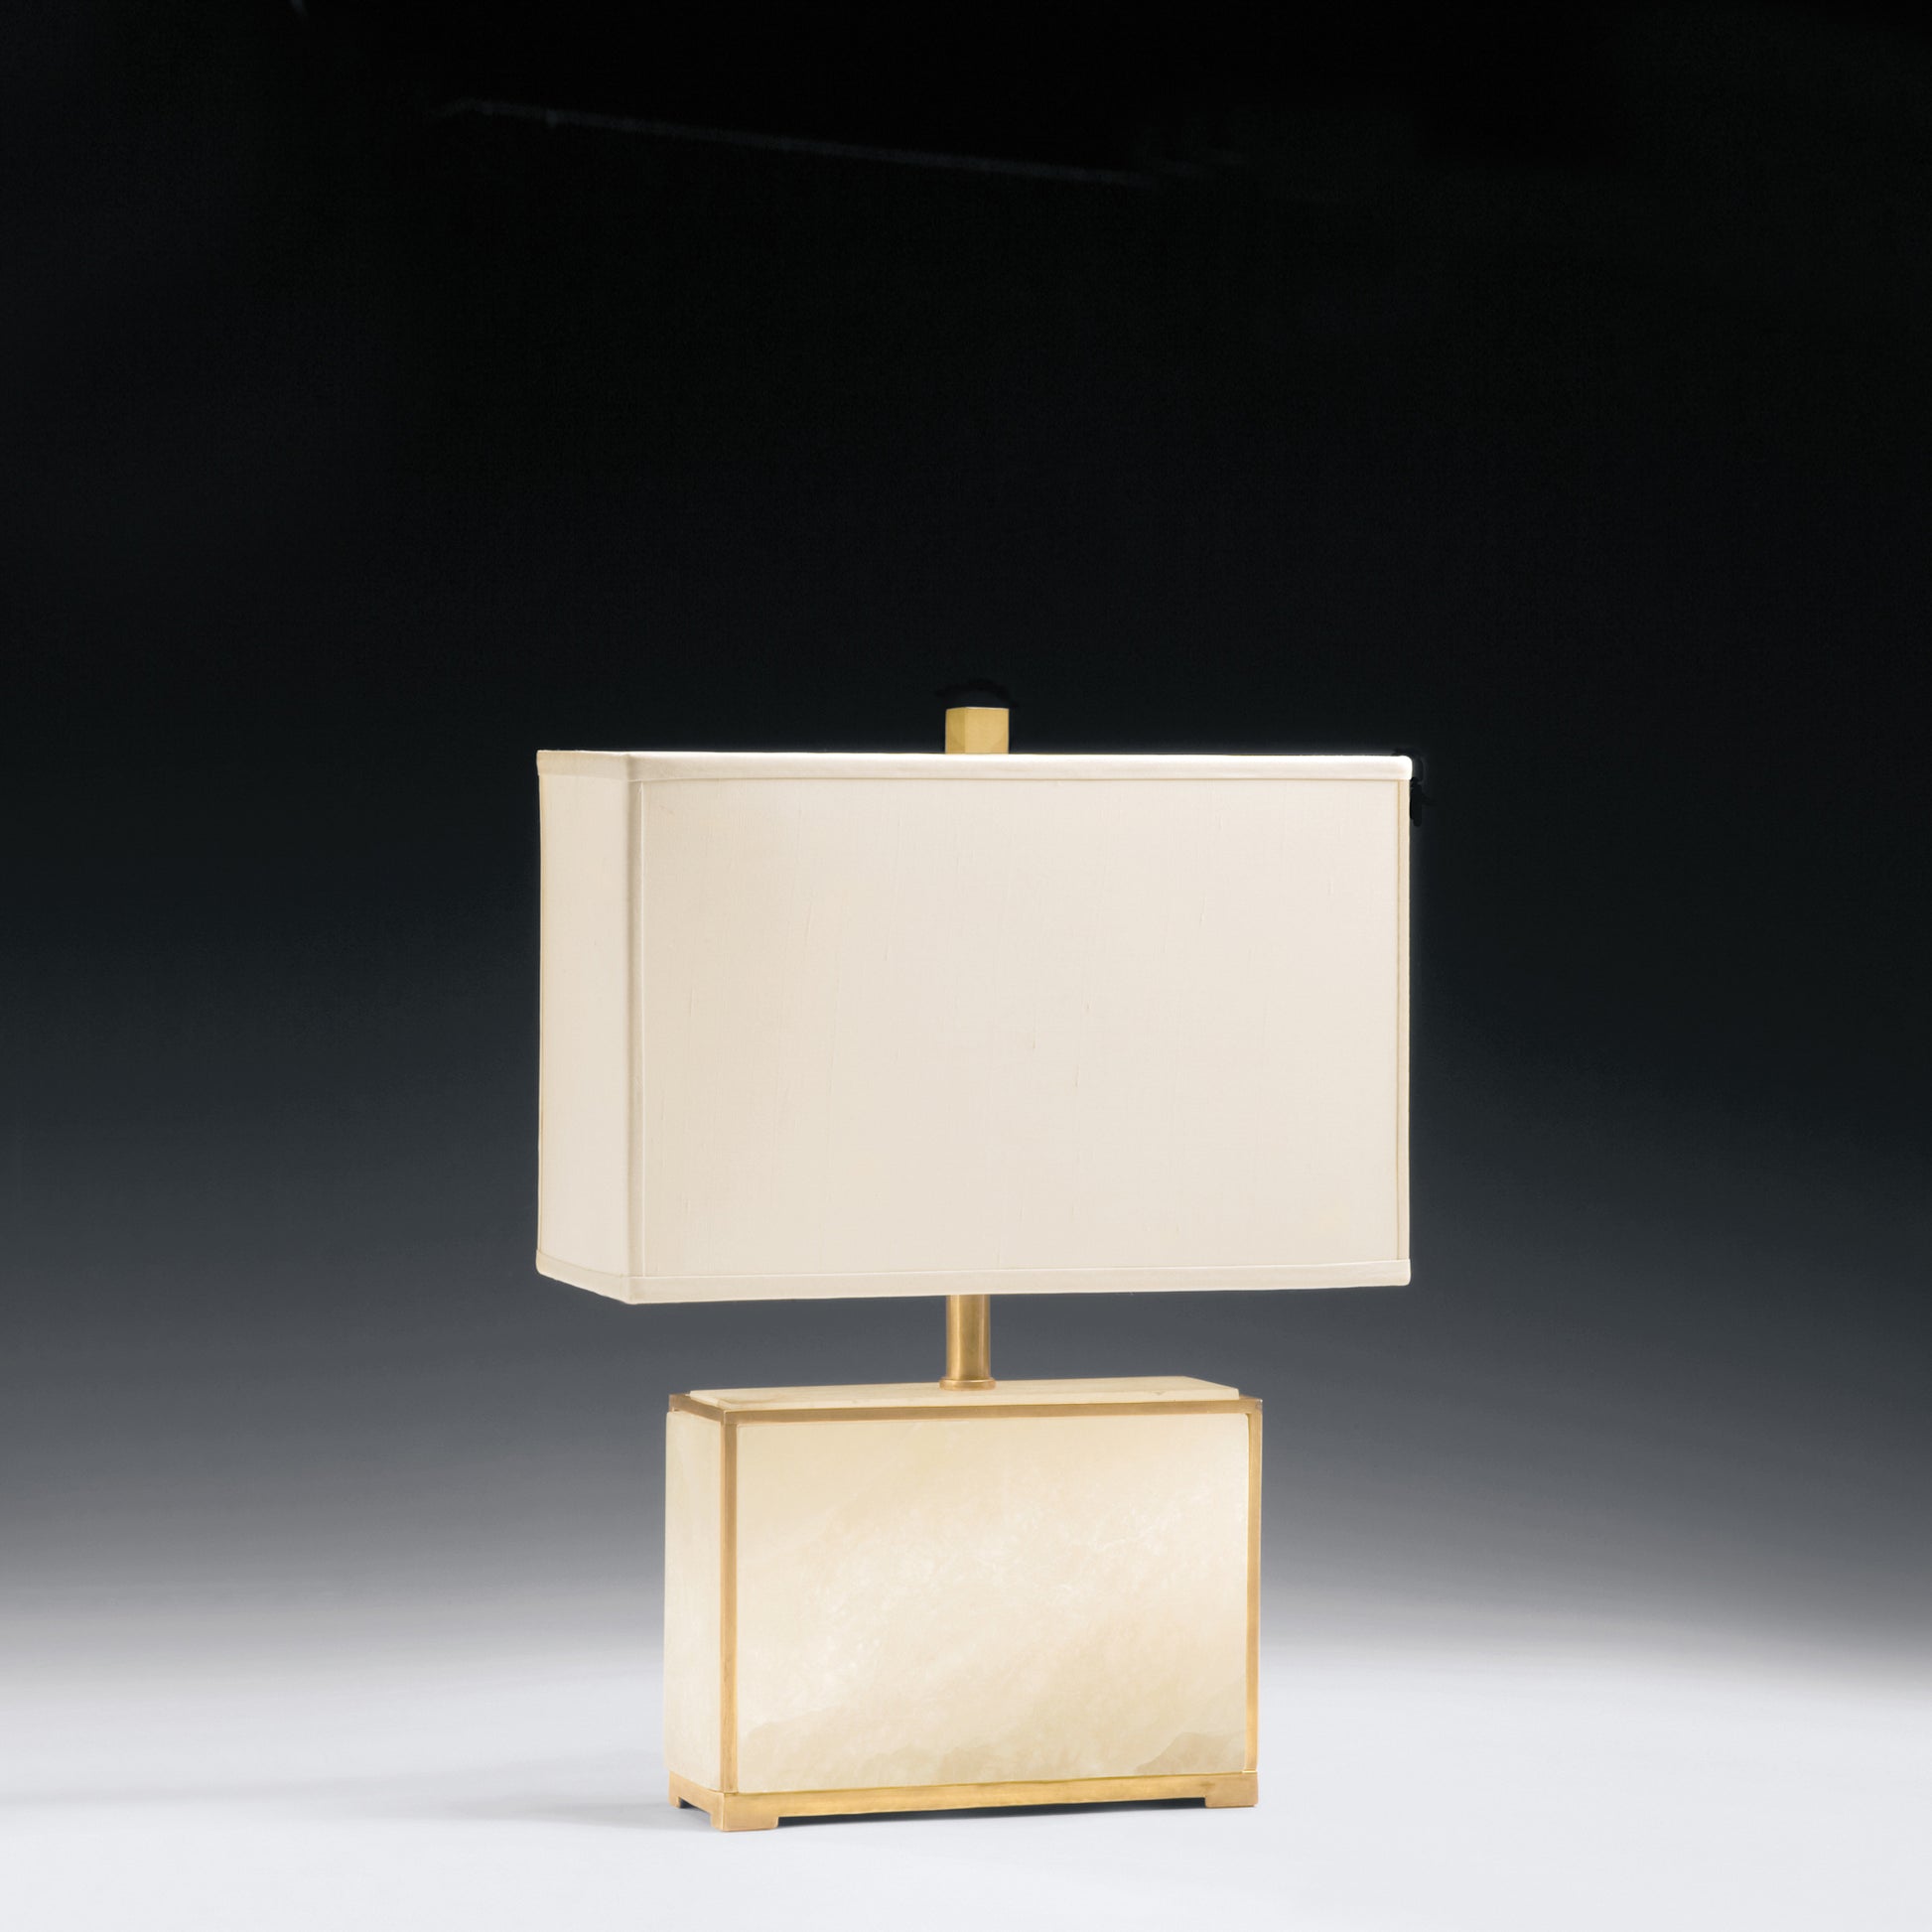 Alabaster table lamp with antique brass accent and modern rectangular shade.